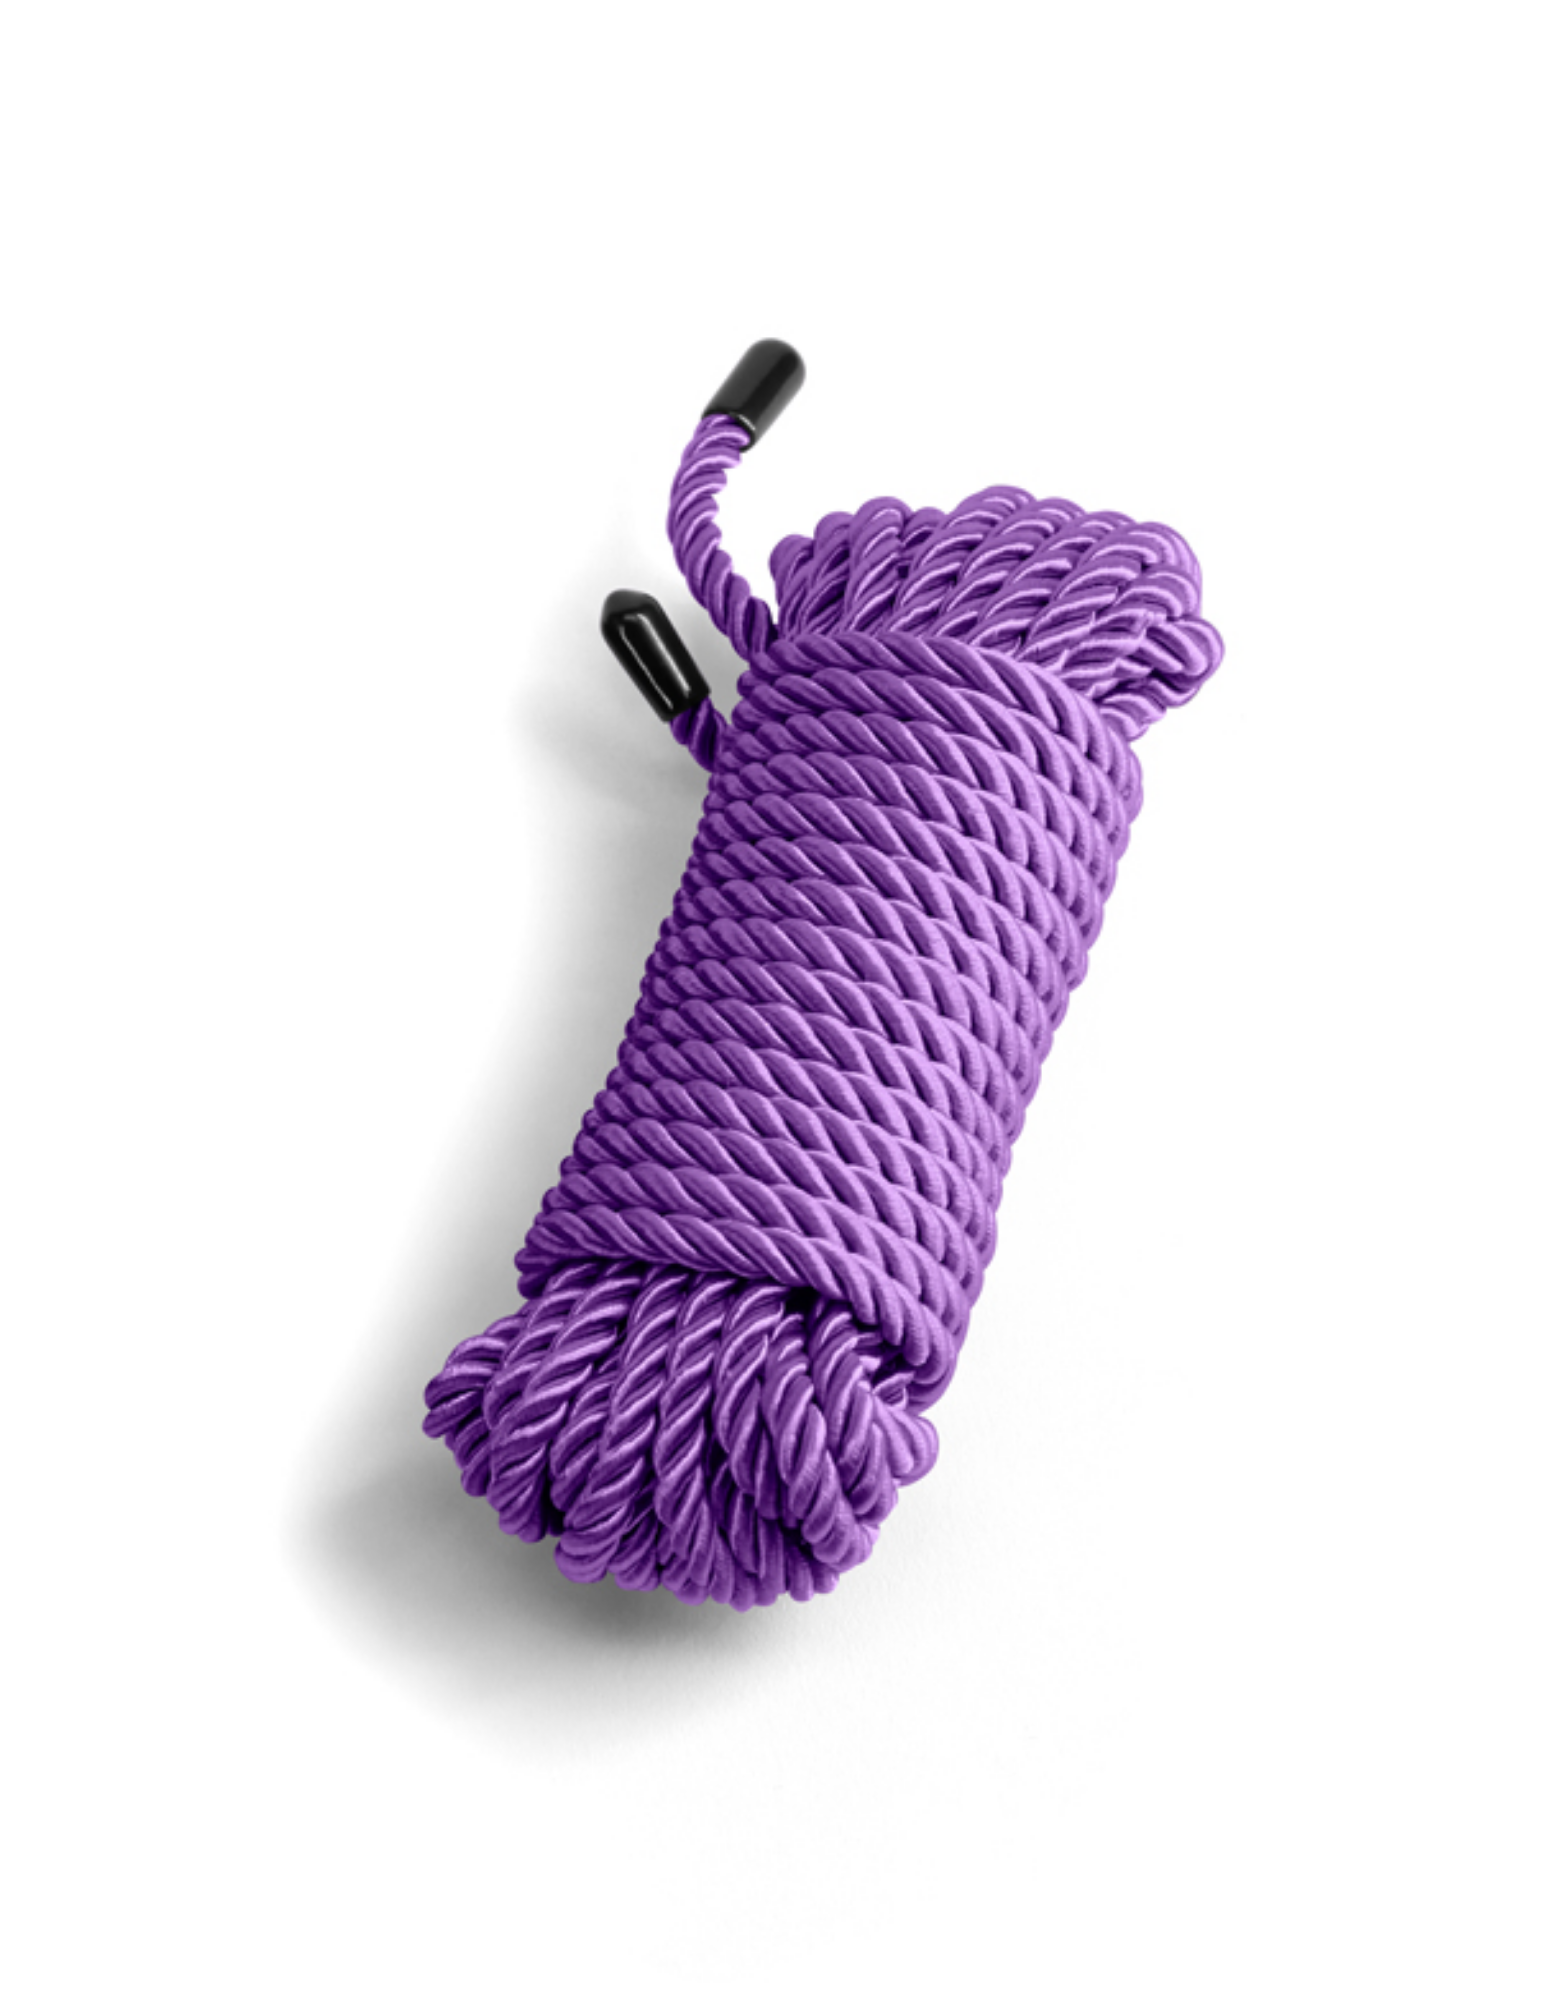 Close-up of the bundle of Bound Rope from NS Novelties (purple) shows its soft texture and finished ends.